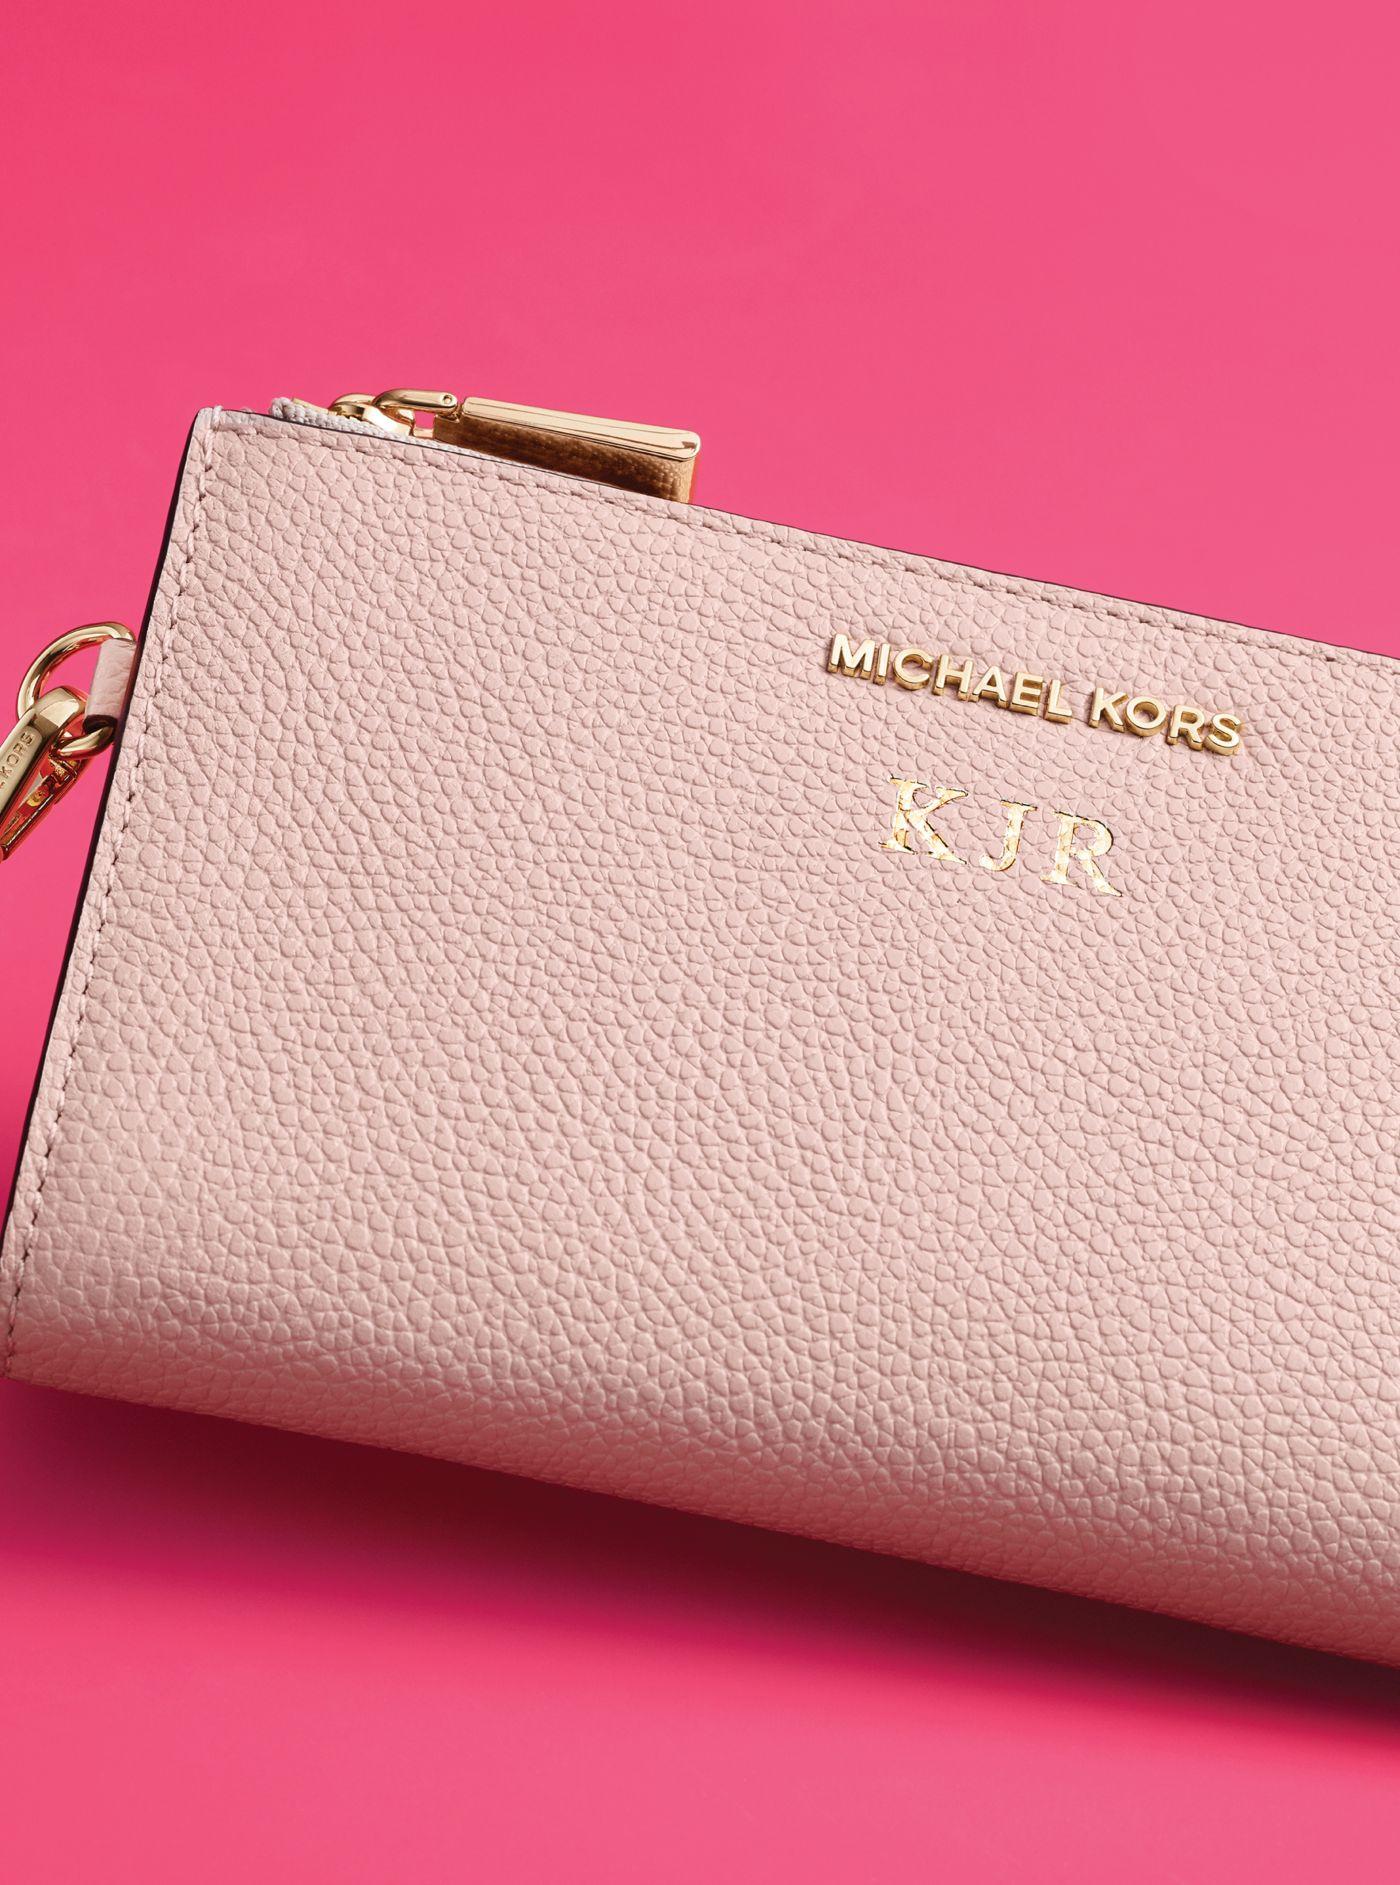 Michael Kors Adele Leather Smartphone Wallet in Soft Pink (Pink) - Lyst